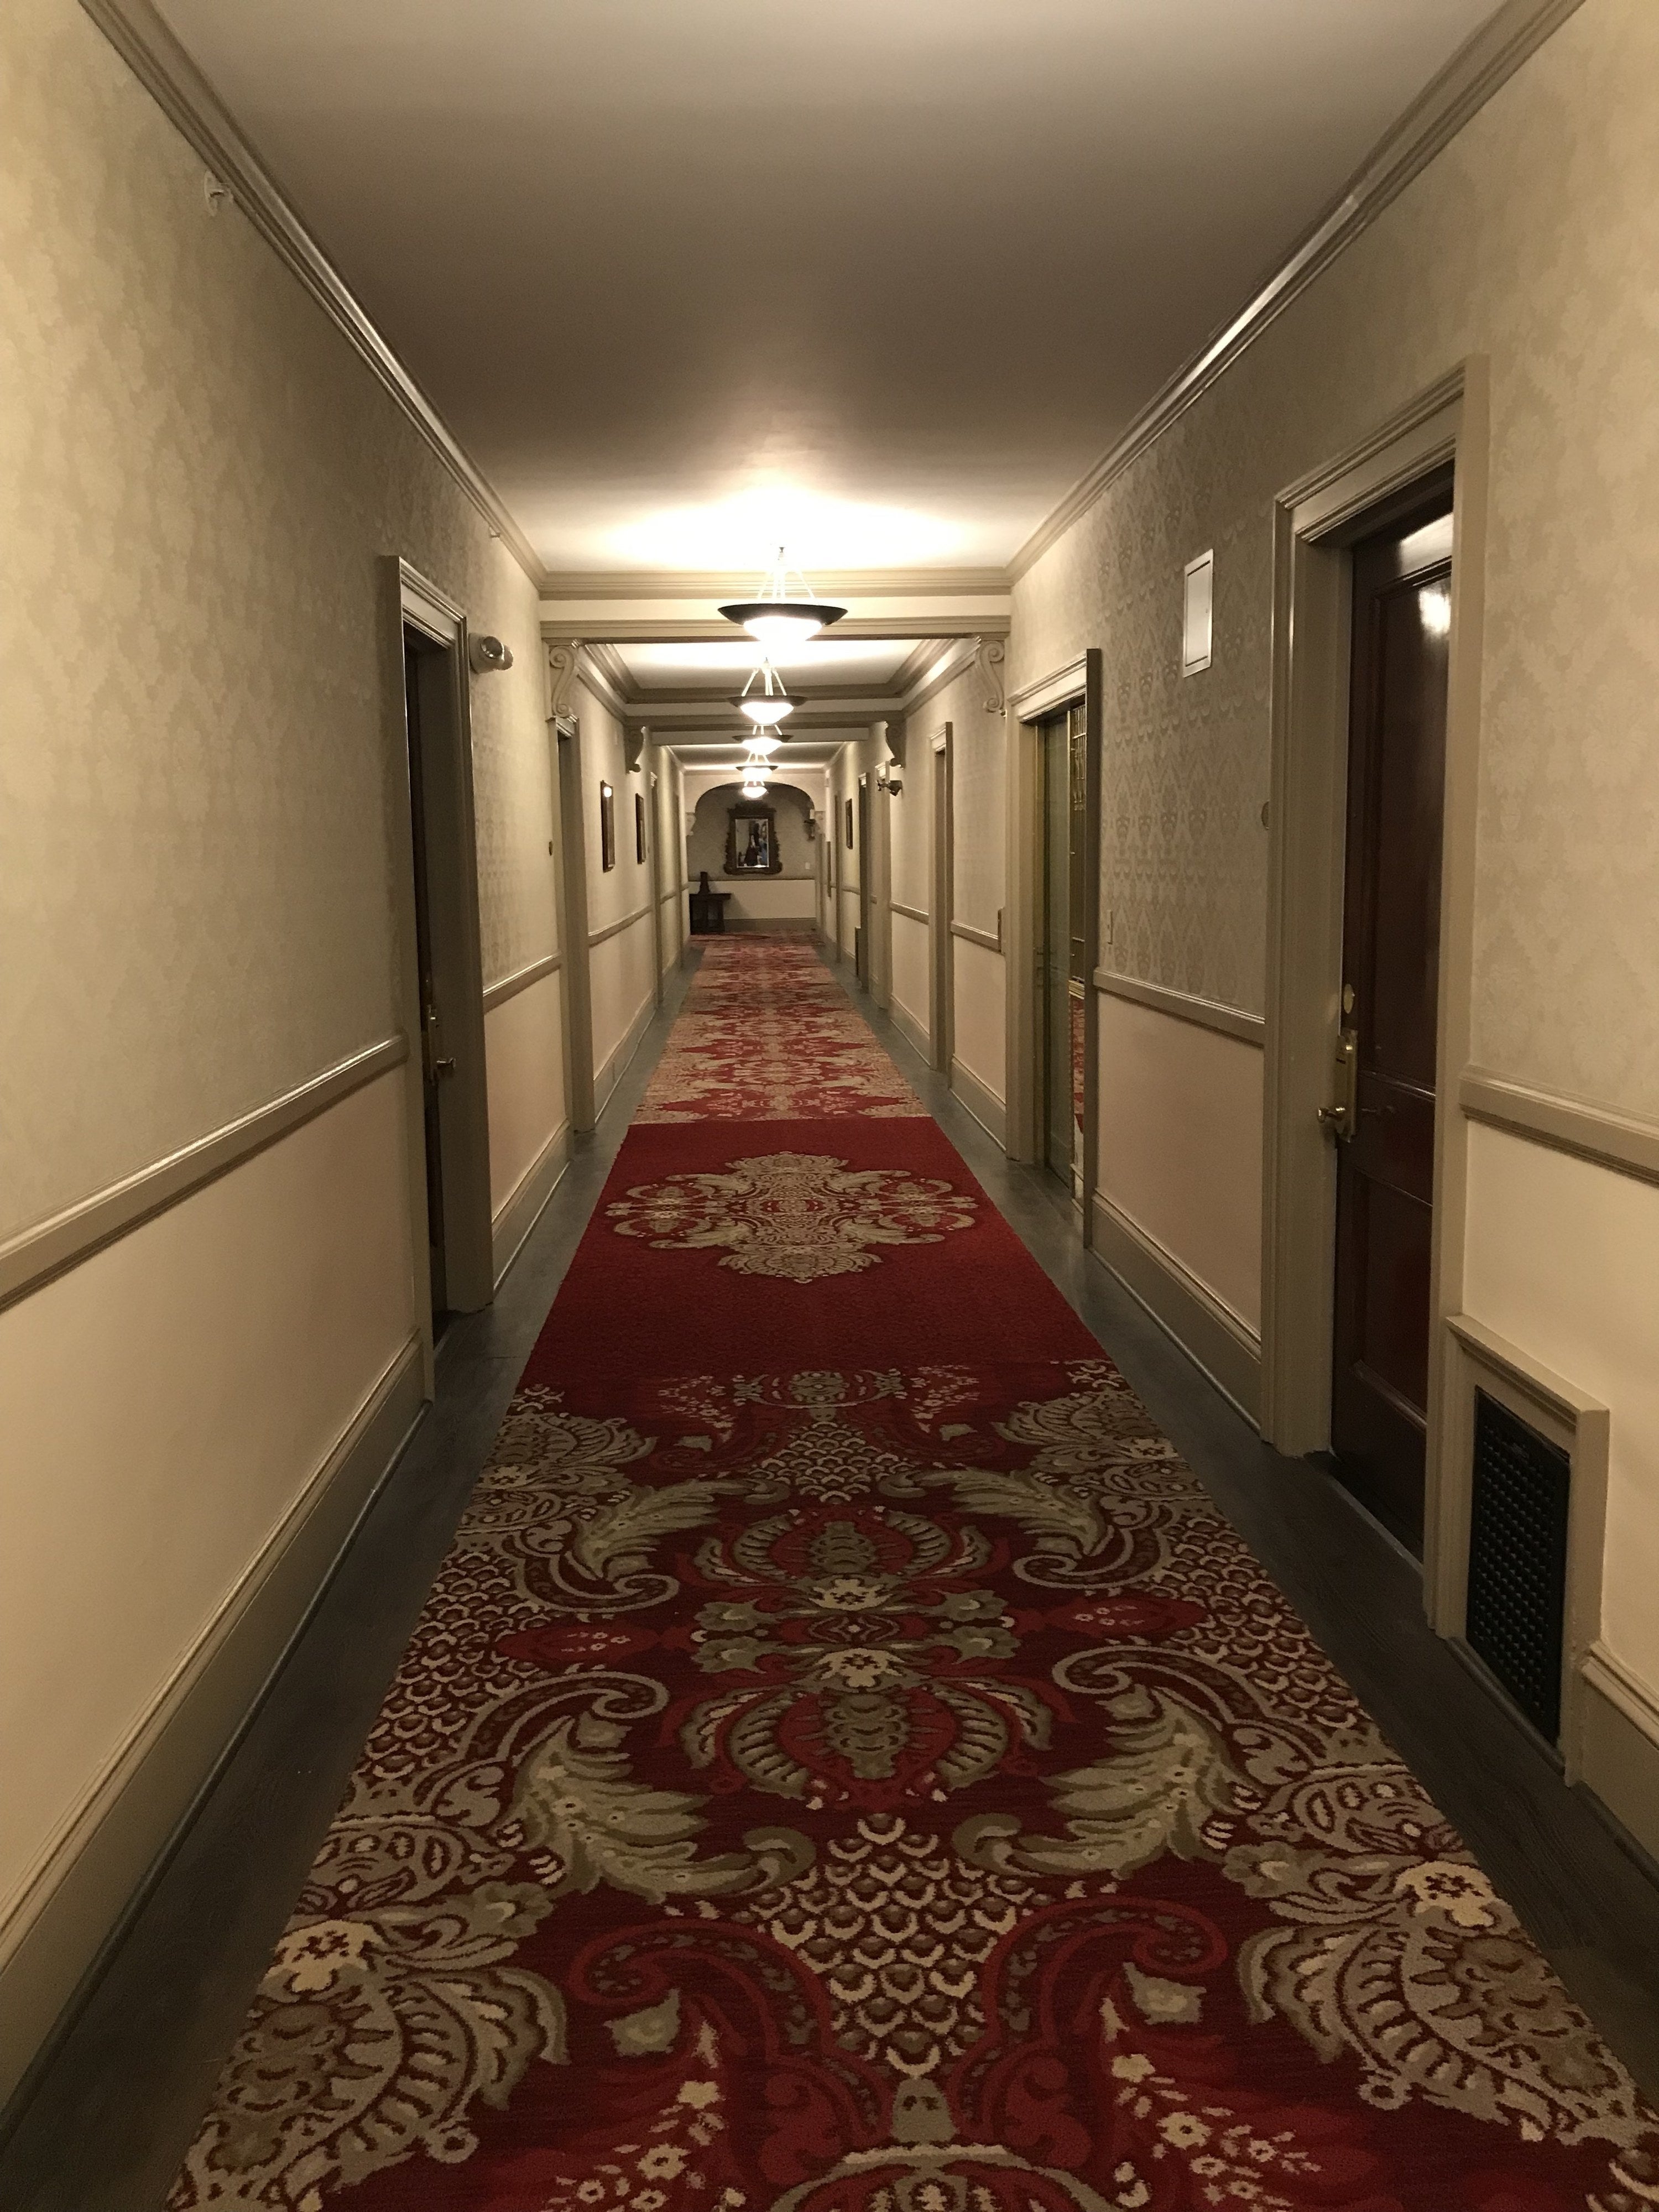 Facts About The Haunted Hotel That, Overlook Hotel Rug 8×10